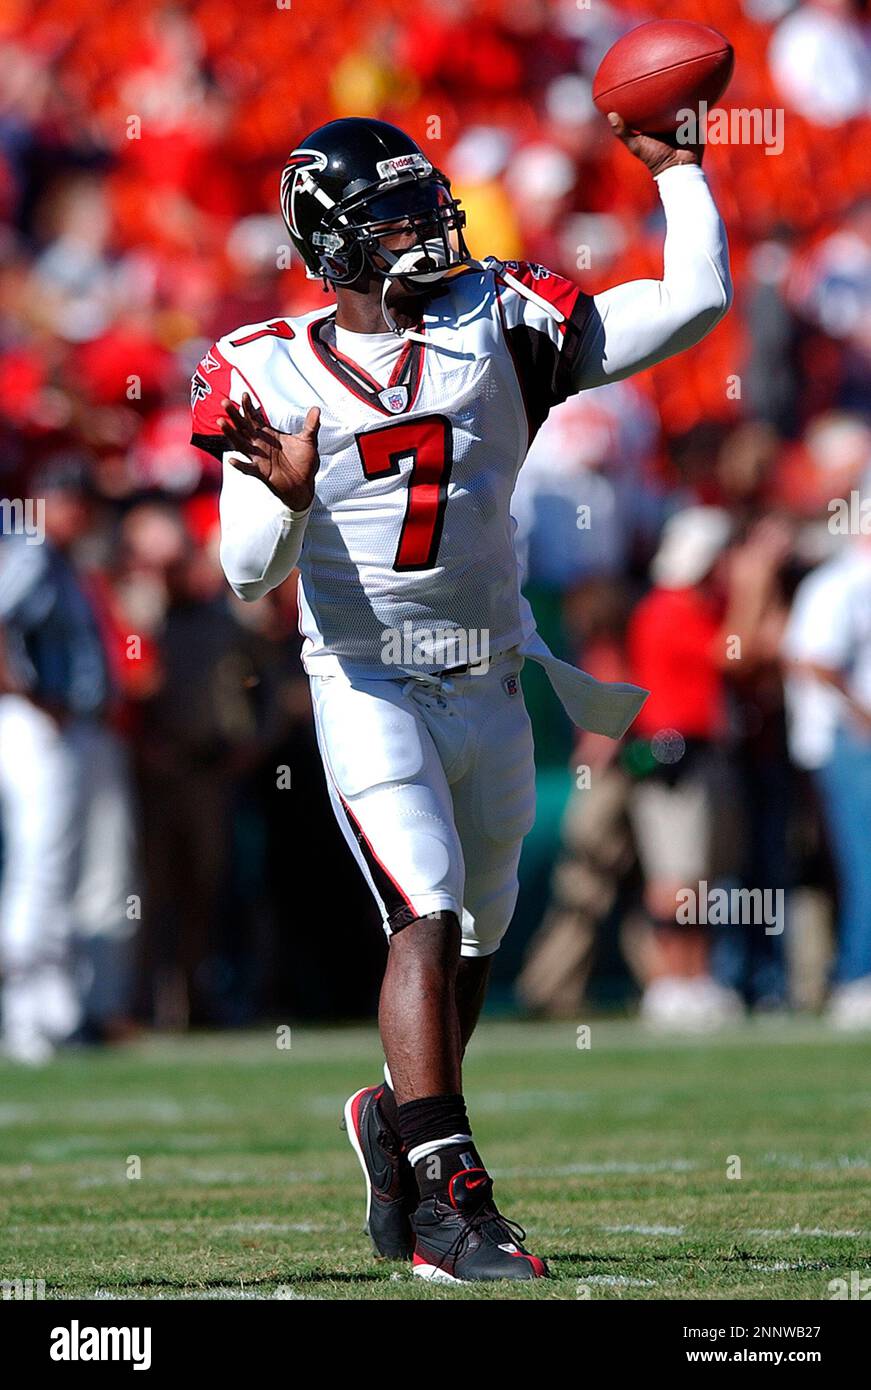 Michael Vick Returns: Atlanta Falcons Icon To Play In New League